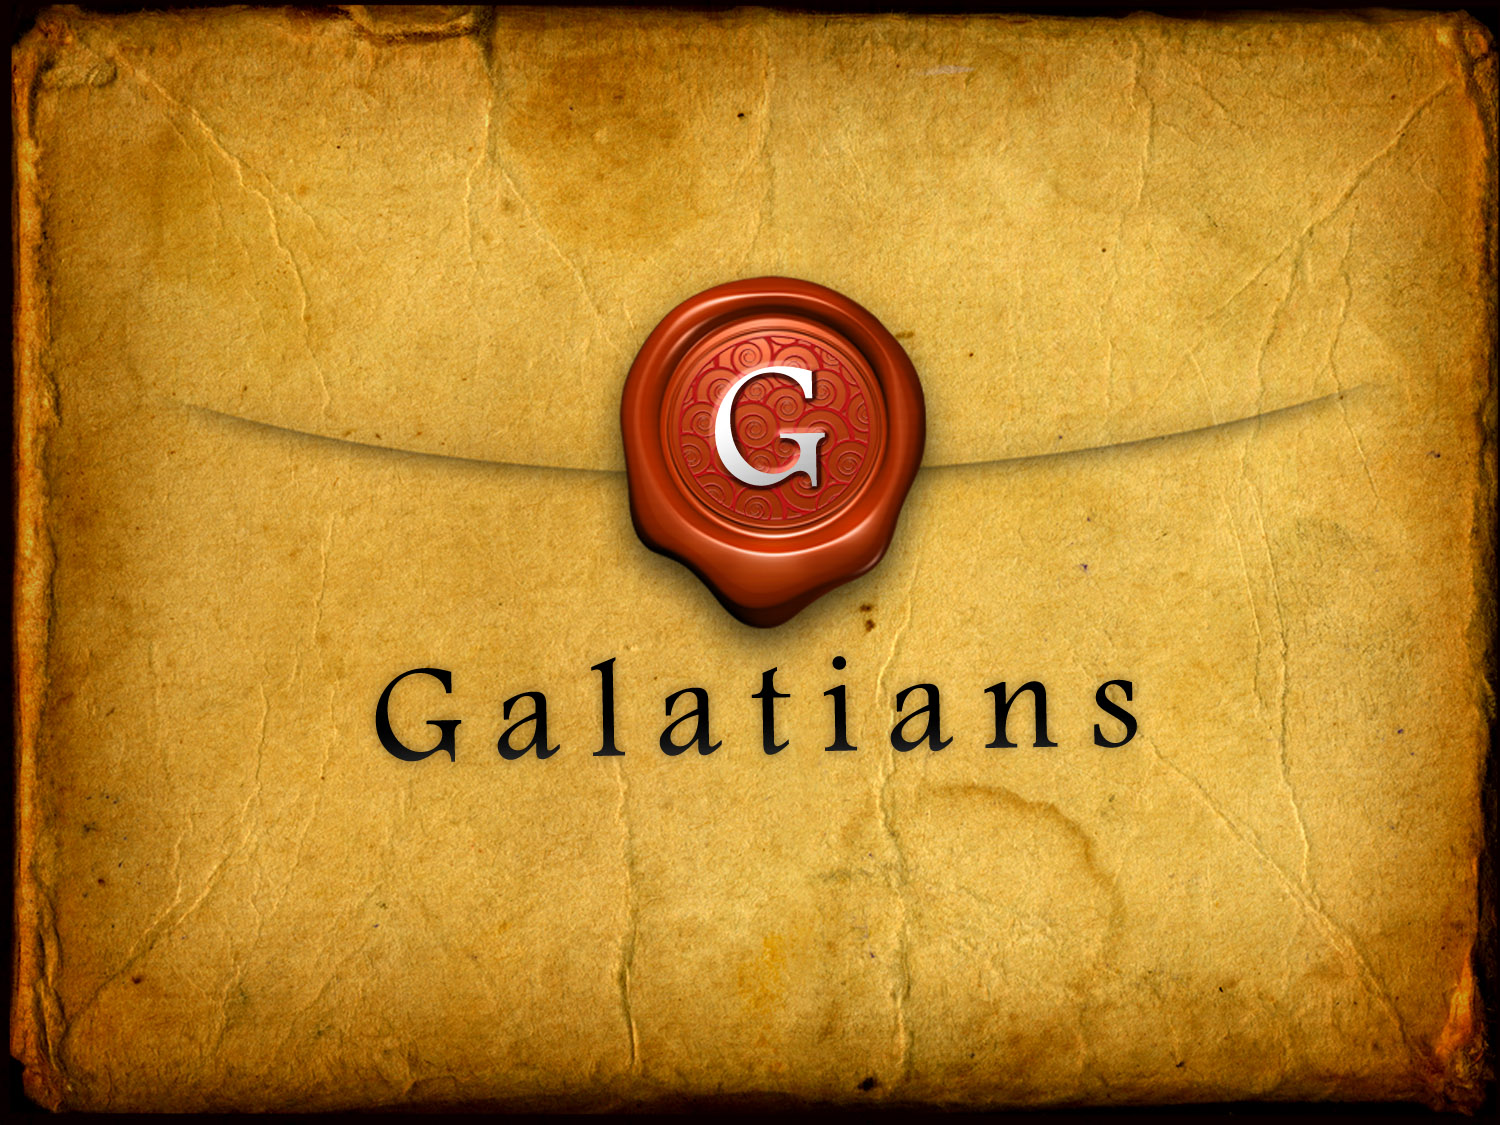 The Book of Galatians 1:18-24